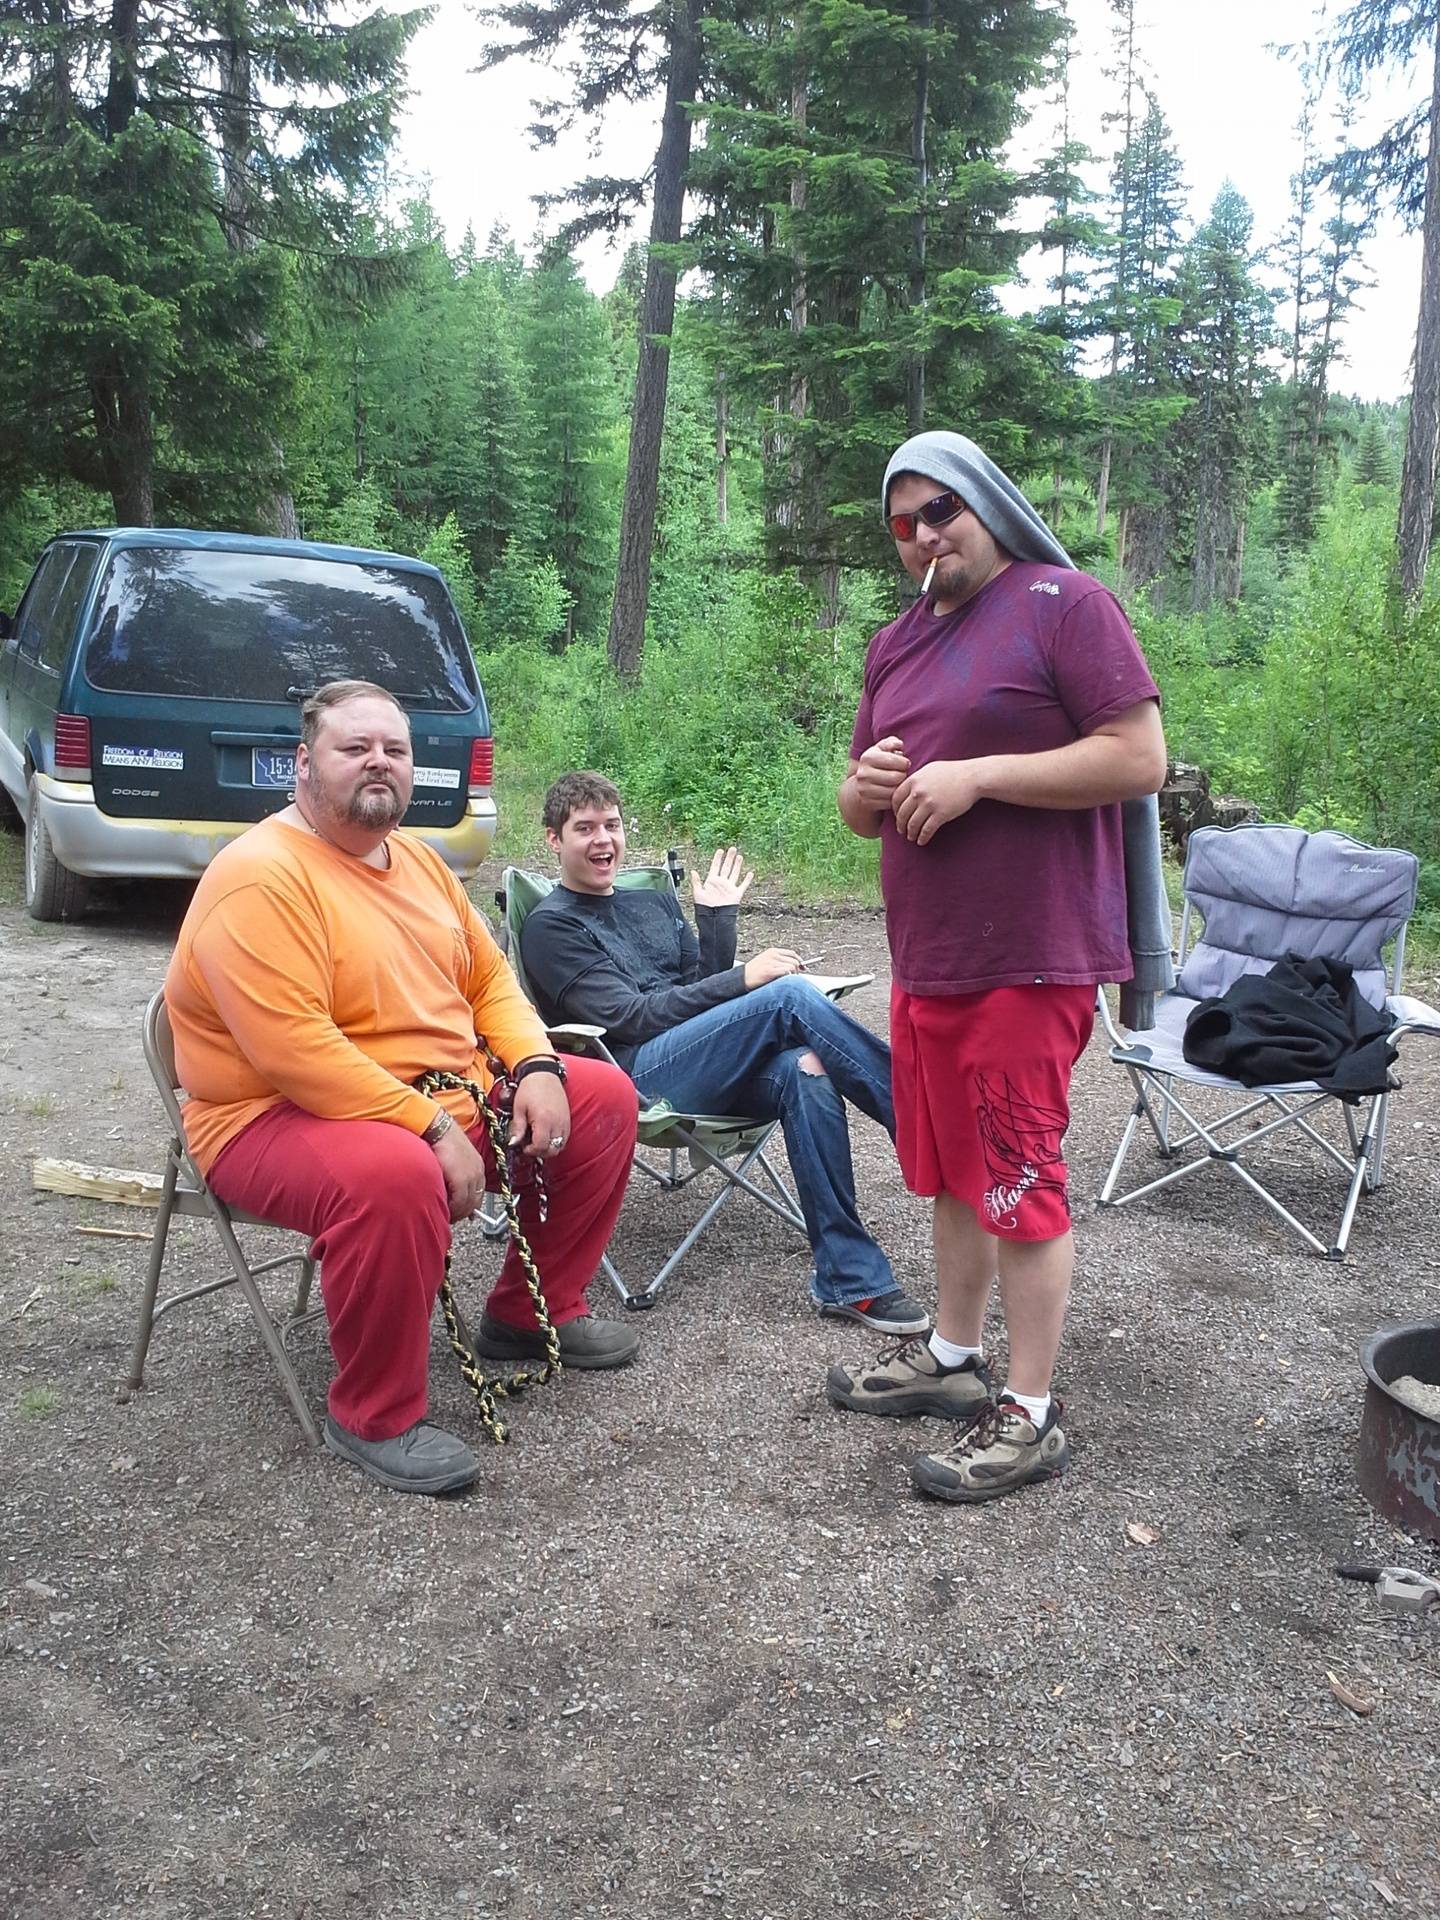 The guys around the fire Summer Solstice 21013